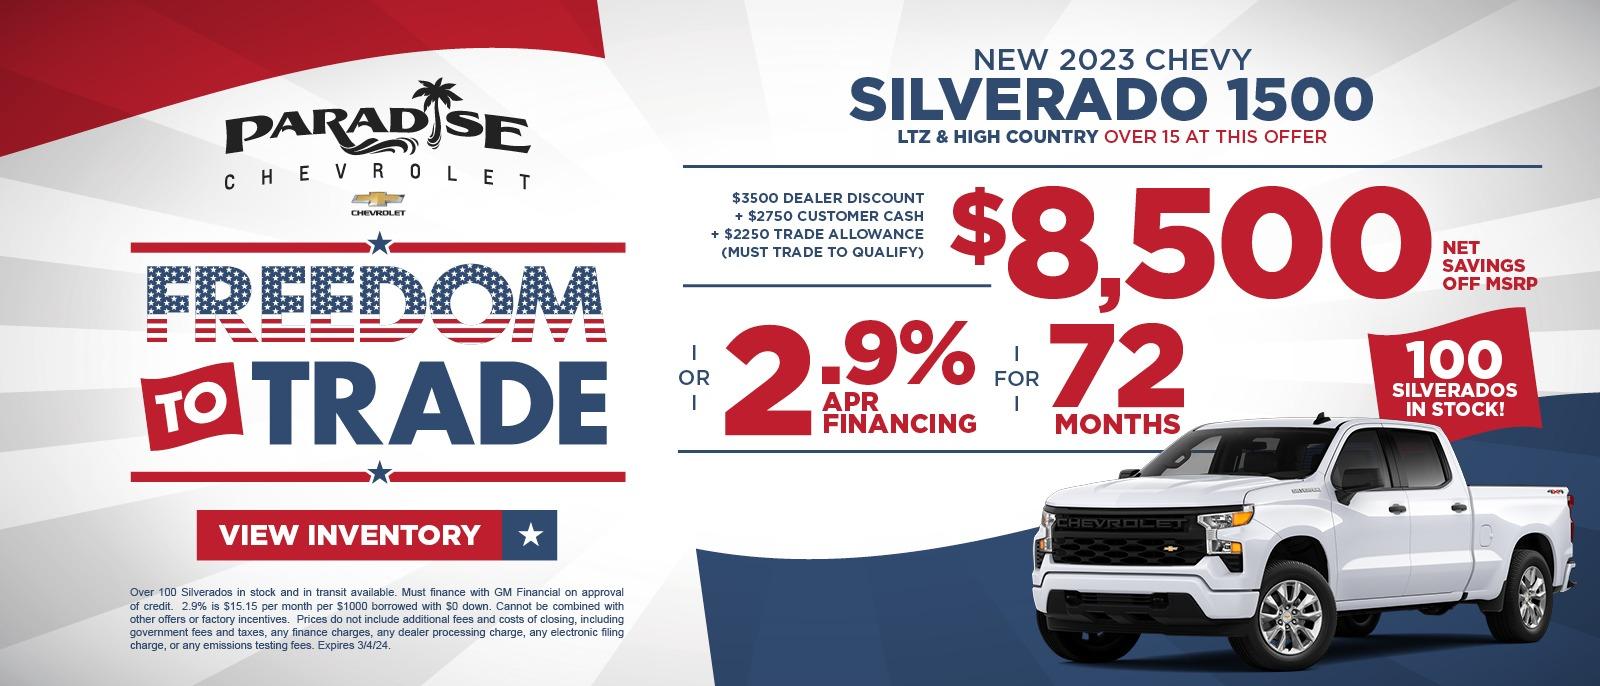 Up to $8,500 Off MSRP on 2023 Chevy Silverado 1500s In stock at Paradise